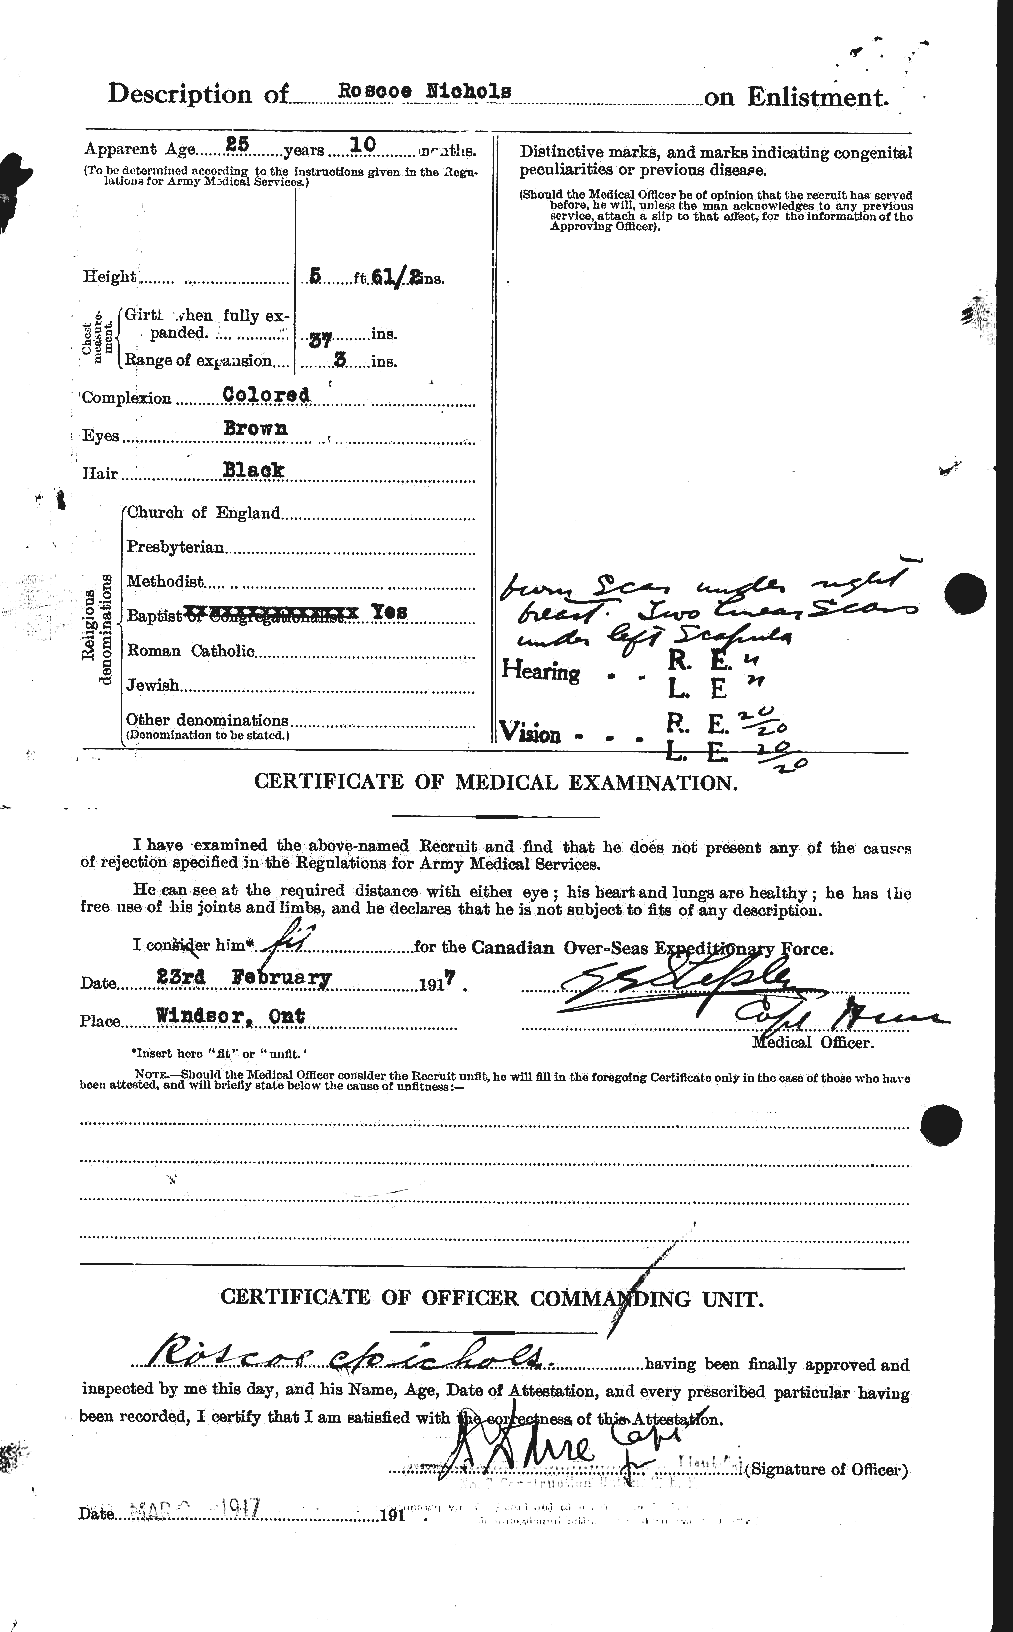 Personnel Records of the First World War - CEF 551037b